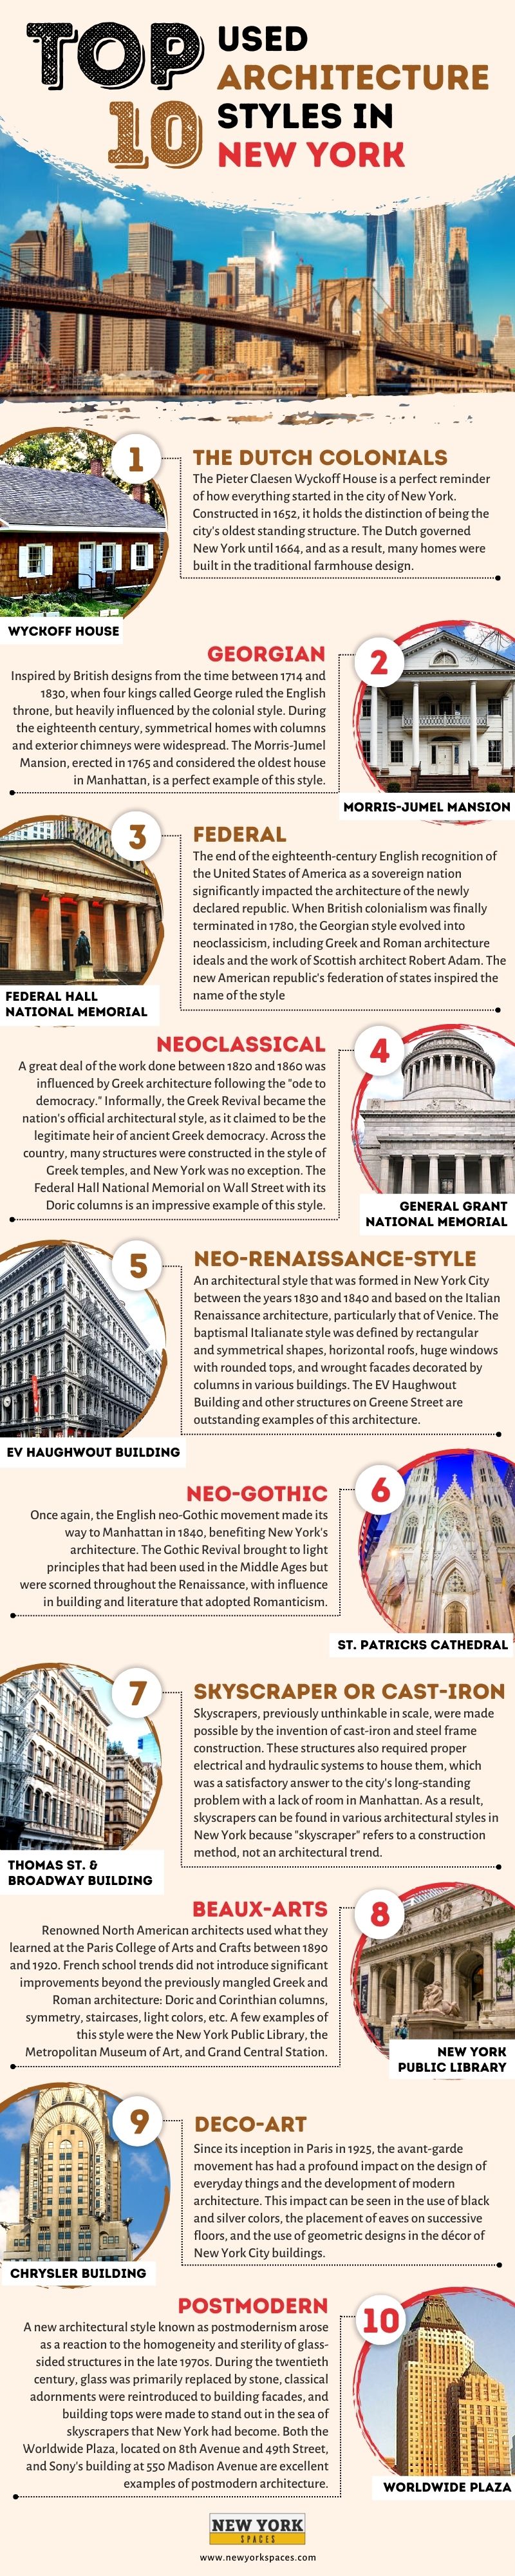 Top 10 Most Used Architecture Styles in New York